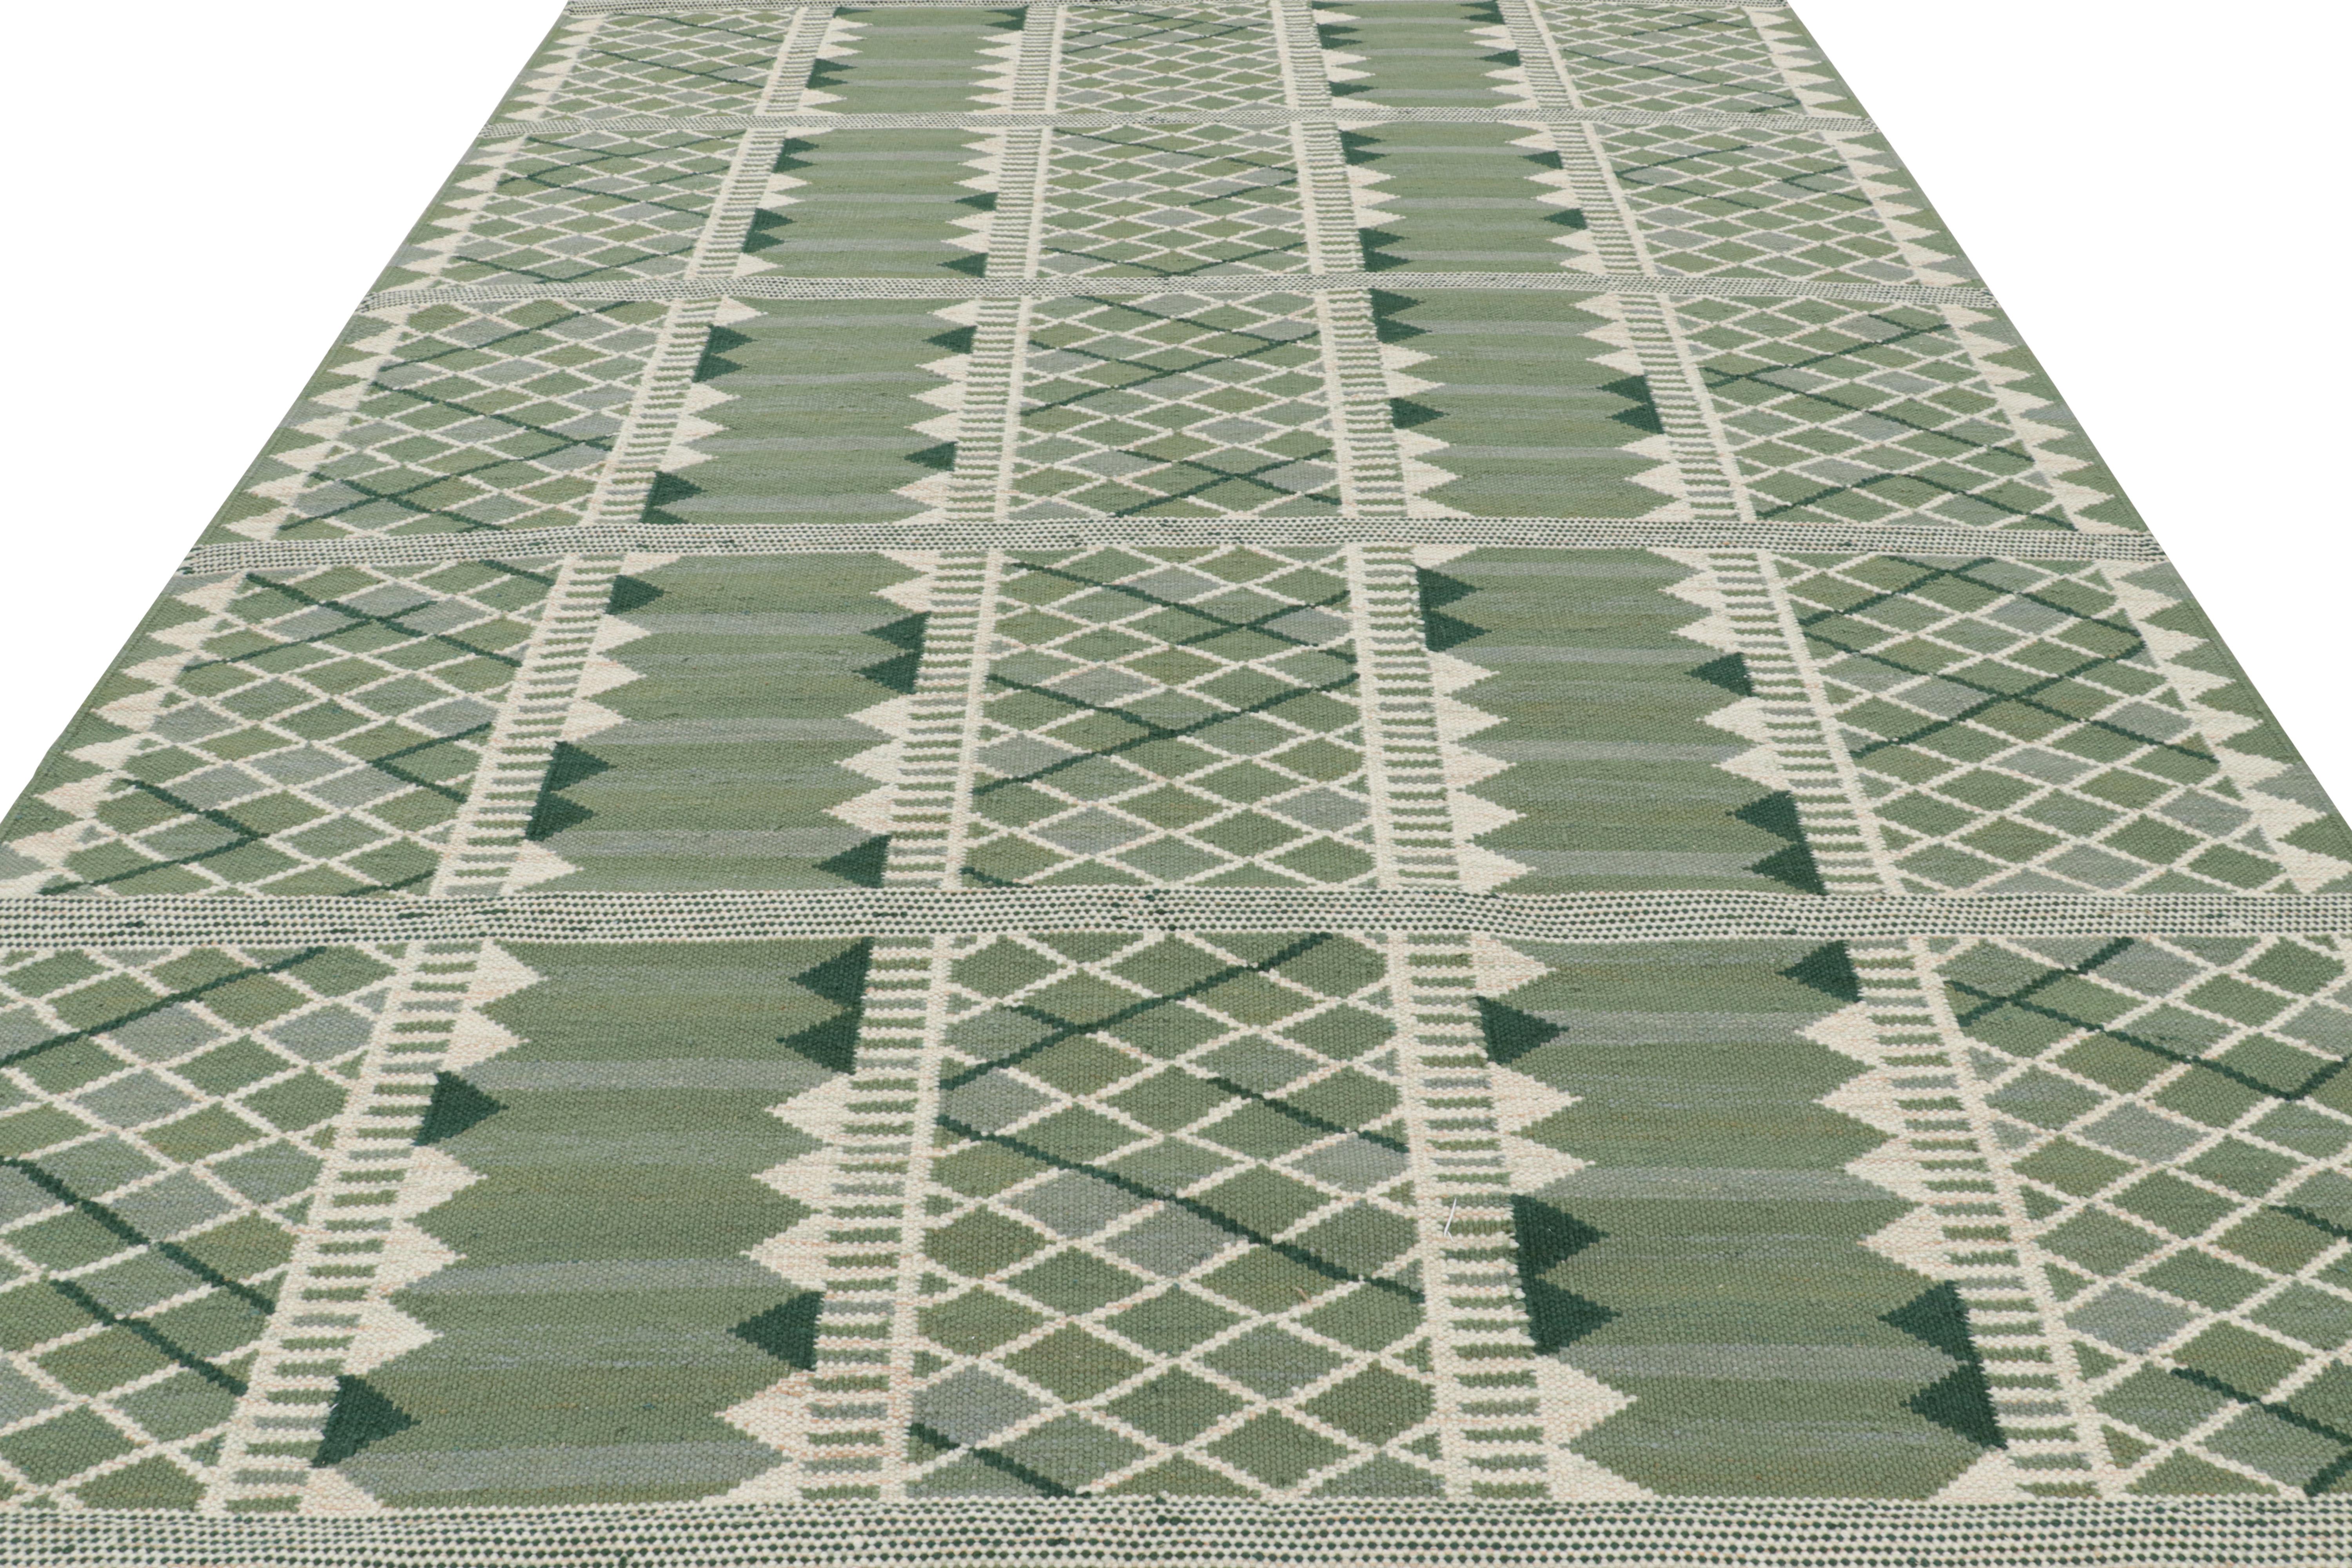 Hand-Woven Rug & Kilim’s Scandinavian Style Rug with Geometric Patterns in Tones of Green For Sale